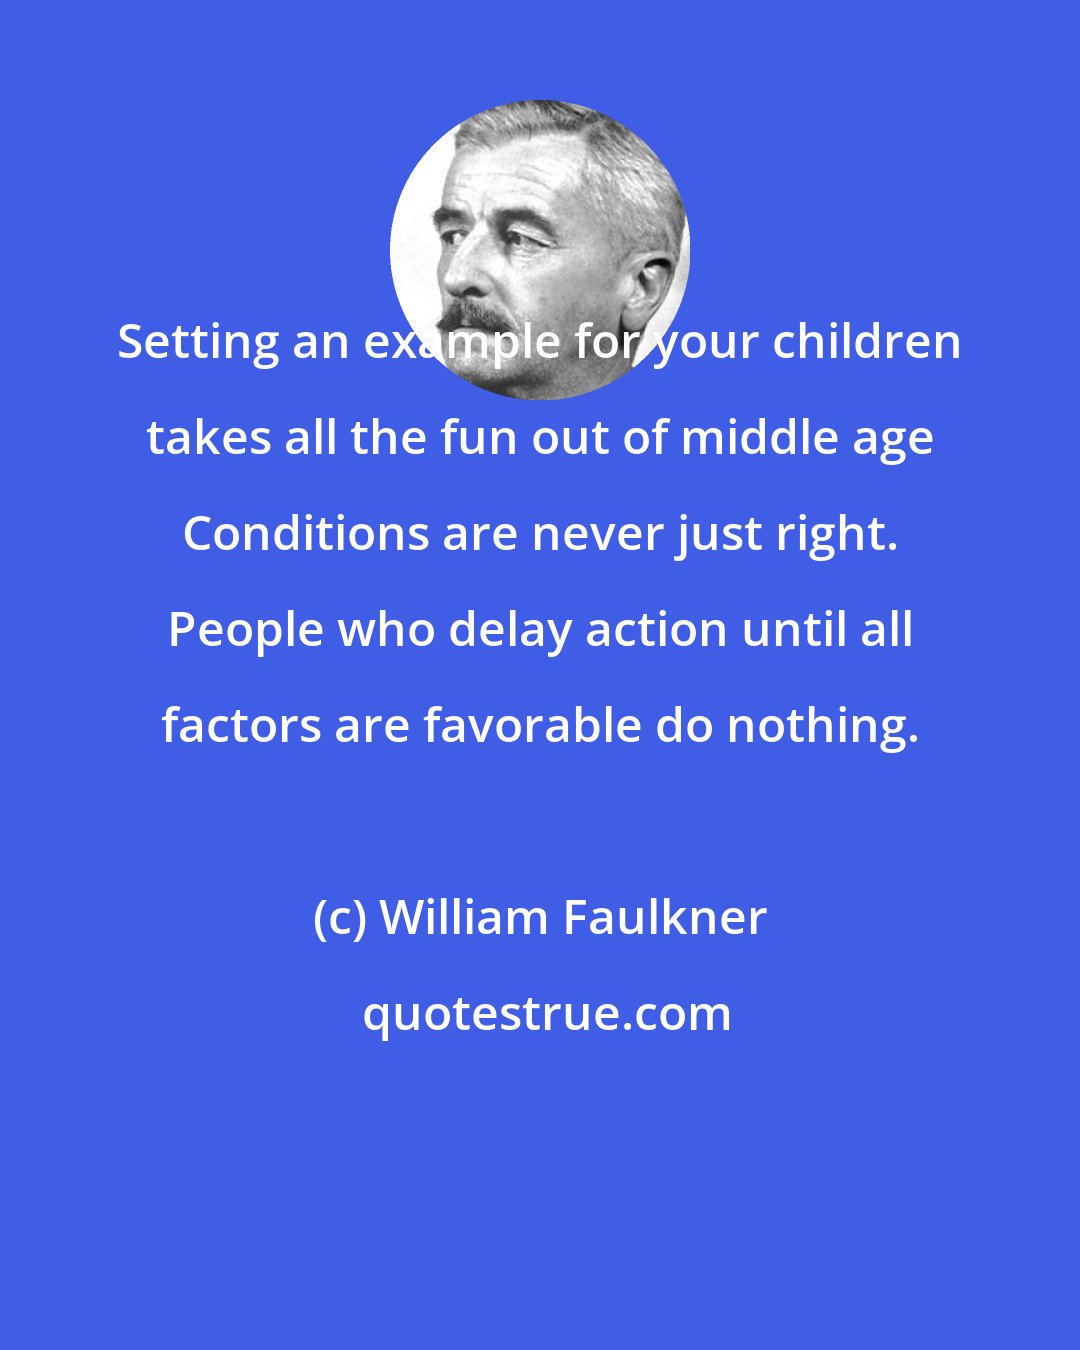 William Faulkner: Setting an example for your children takes all the fun out of middle age Conditions are never just right. People who delay action until all factors are favorable do nothing.